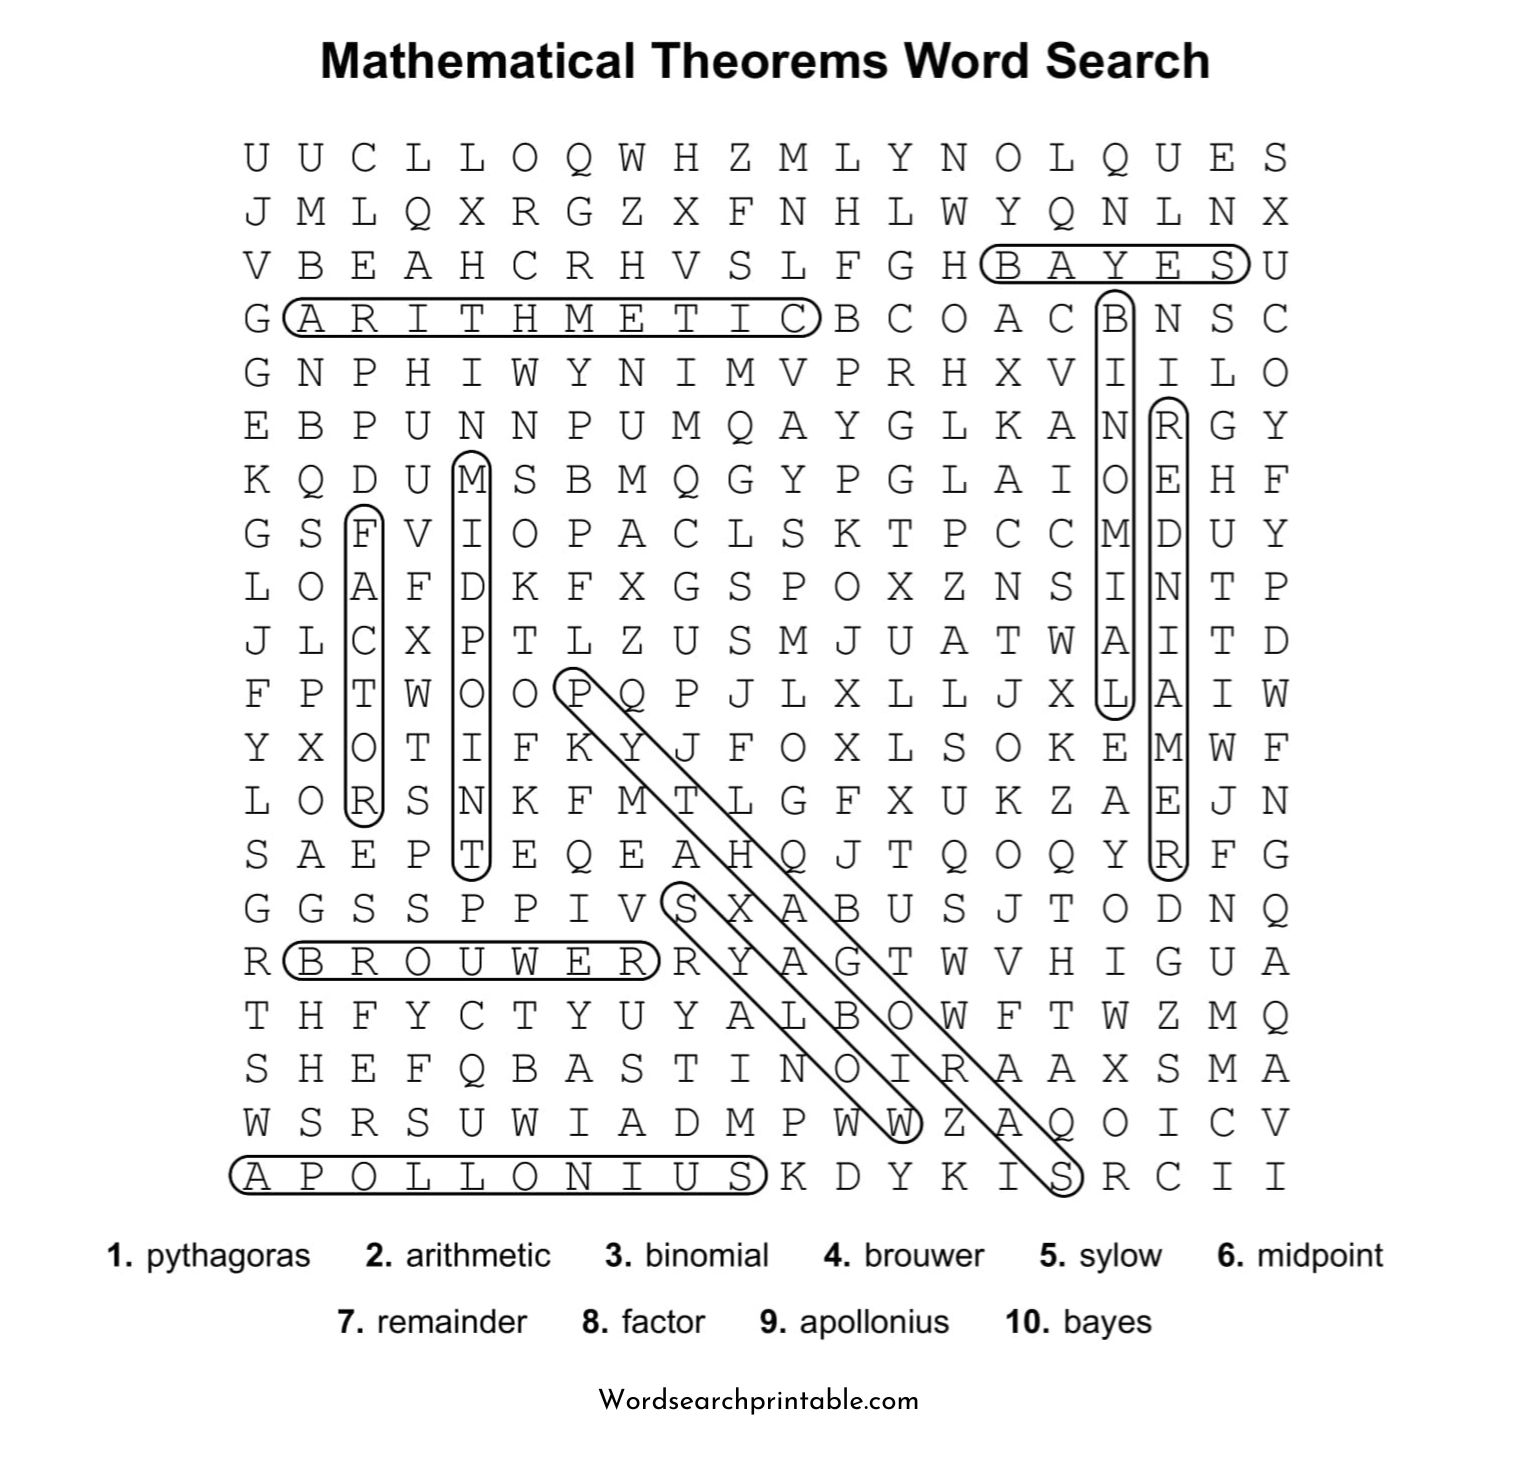 mathematical theorems word search puzzle solution